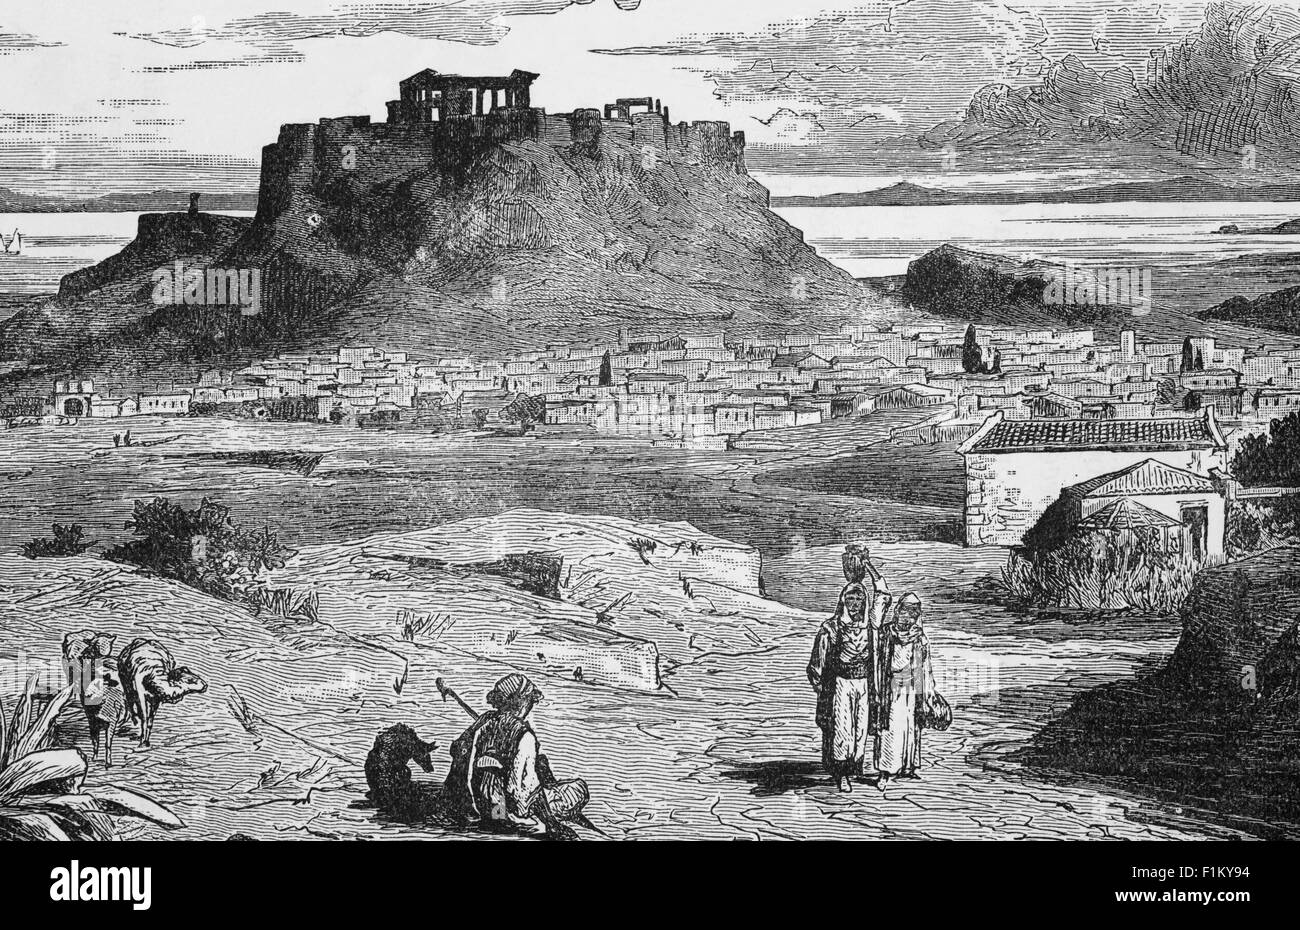 A 19th Century view of the Acropolis, an ancient citadel located on a rocky outcrop above the city of Athens and contains the remains of several ancient buildings of great architectural and historic significance, the most famous being the Parthenon. It was Pericles (c. 495–429 BC) in the fifth century BC who coordinated the construction of the site's most important present remains including the Parthenon, the Propylaea, the Erechtheion and the Temple of Athena Nike Stock Photo